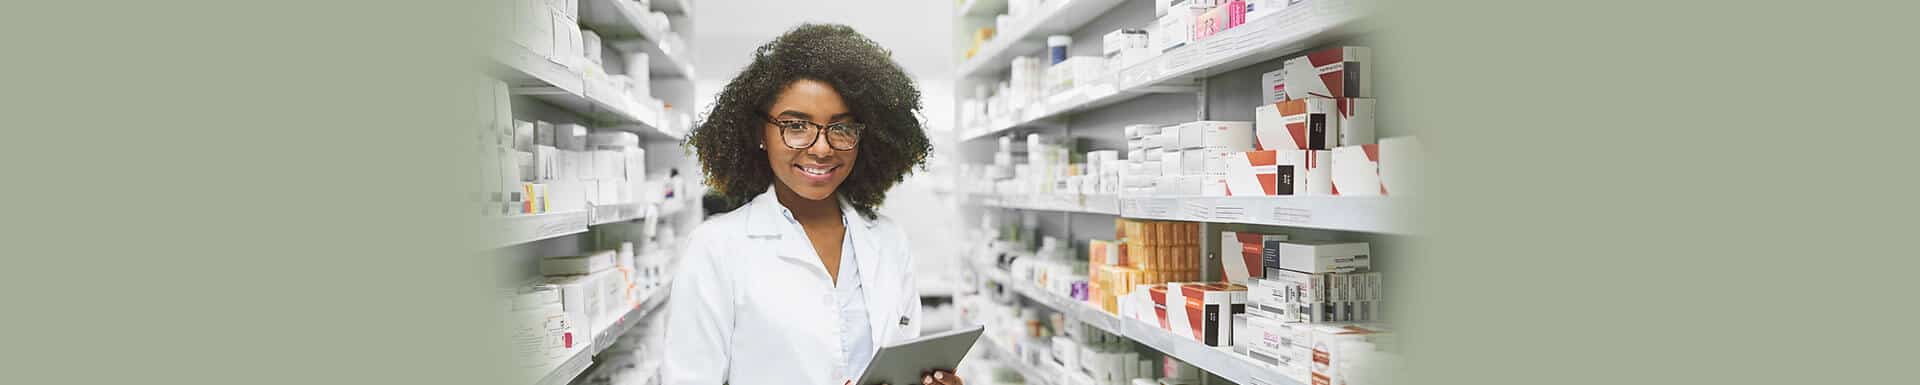 How To Become A Pharmacist: Your Next Career In Healthcare